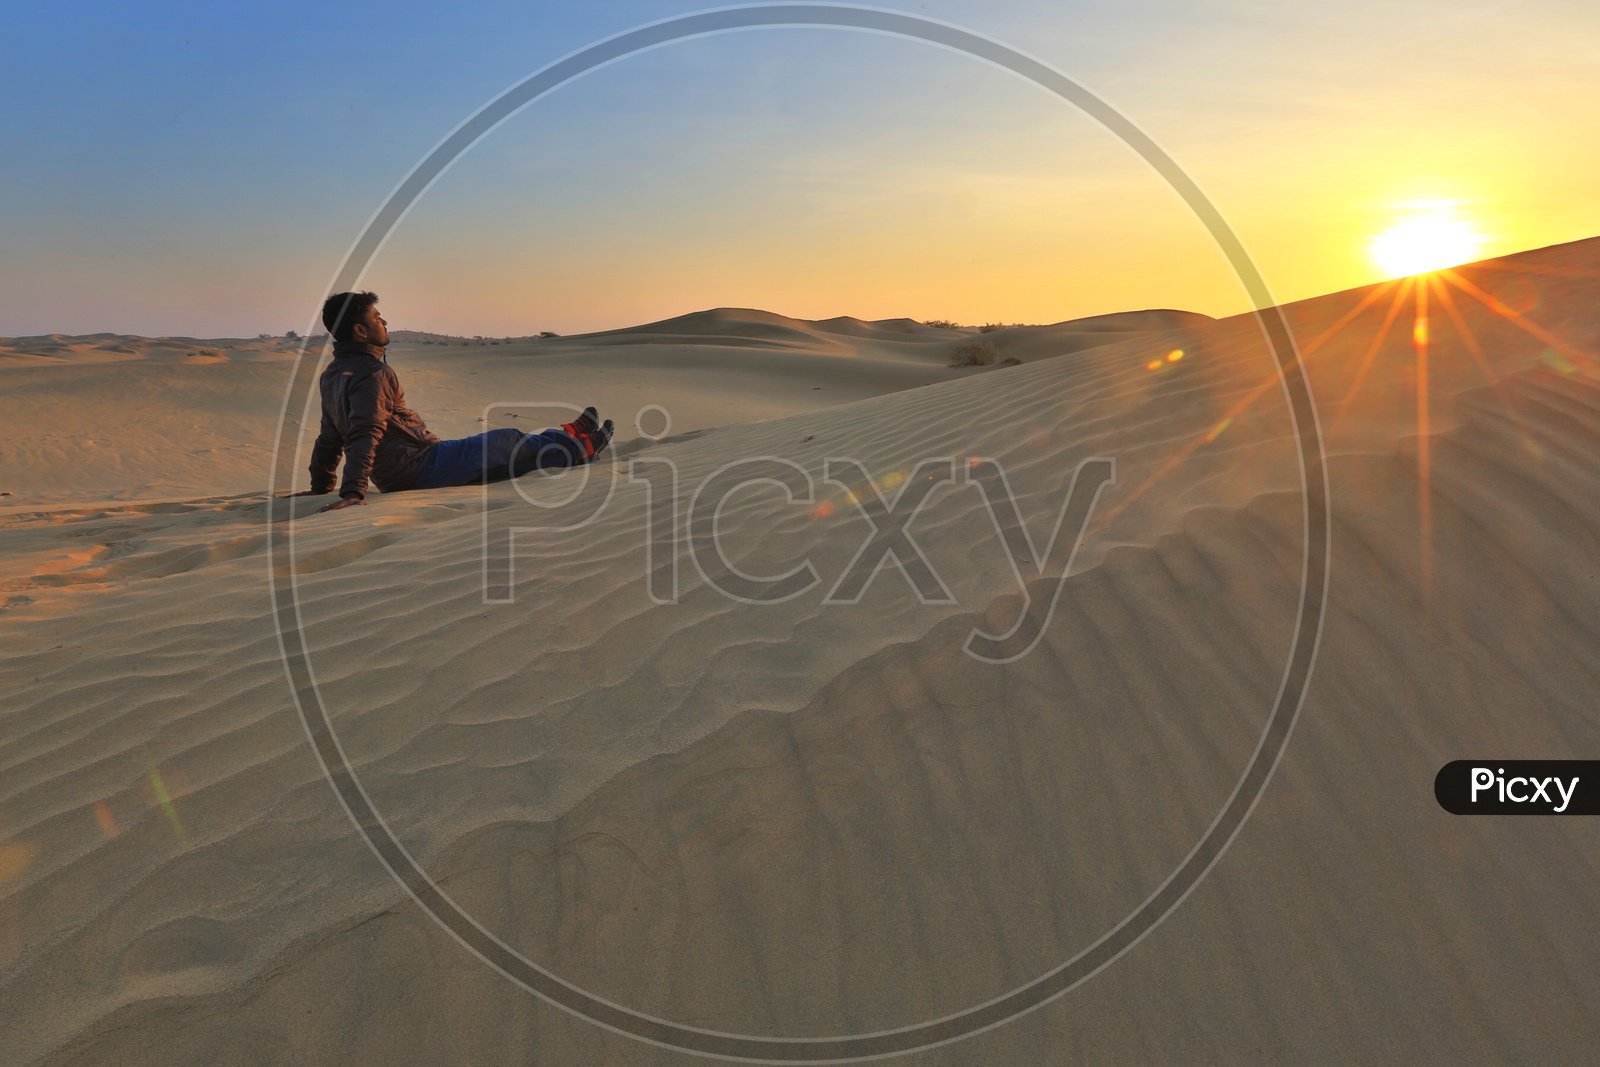 An Indian Man Enjoying The Sunset In a Dessert in Rajasthan Sitting Over Sand Dunes